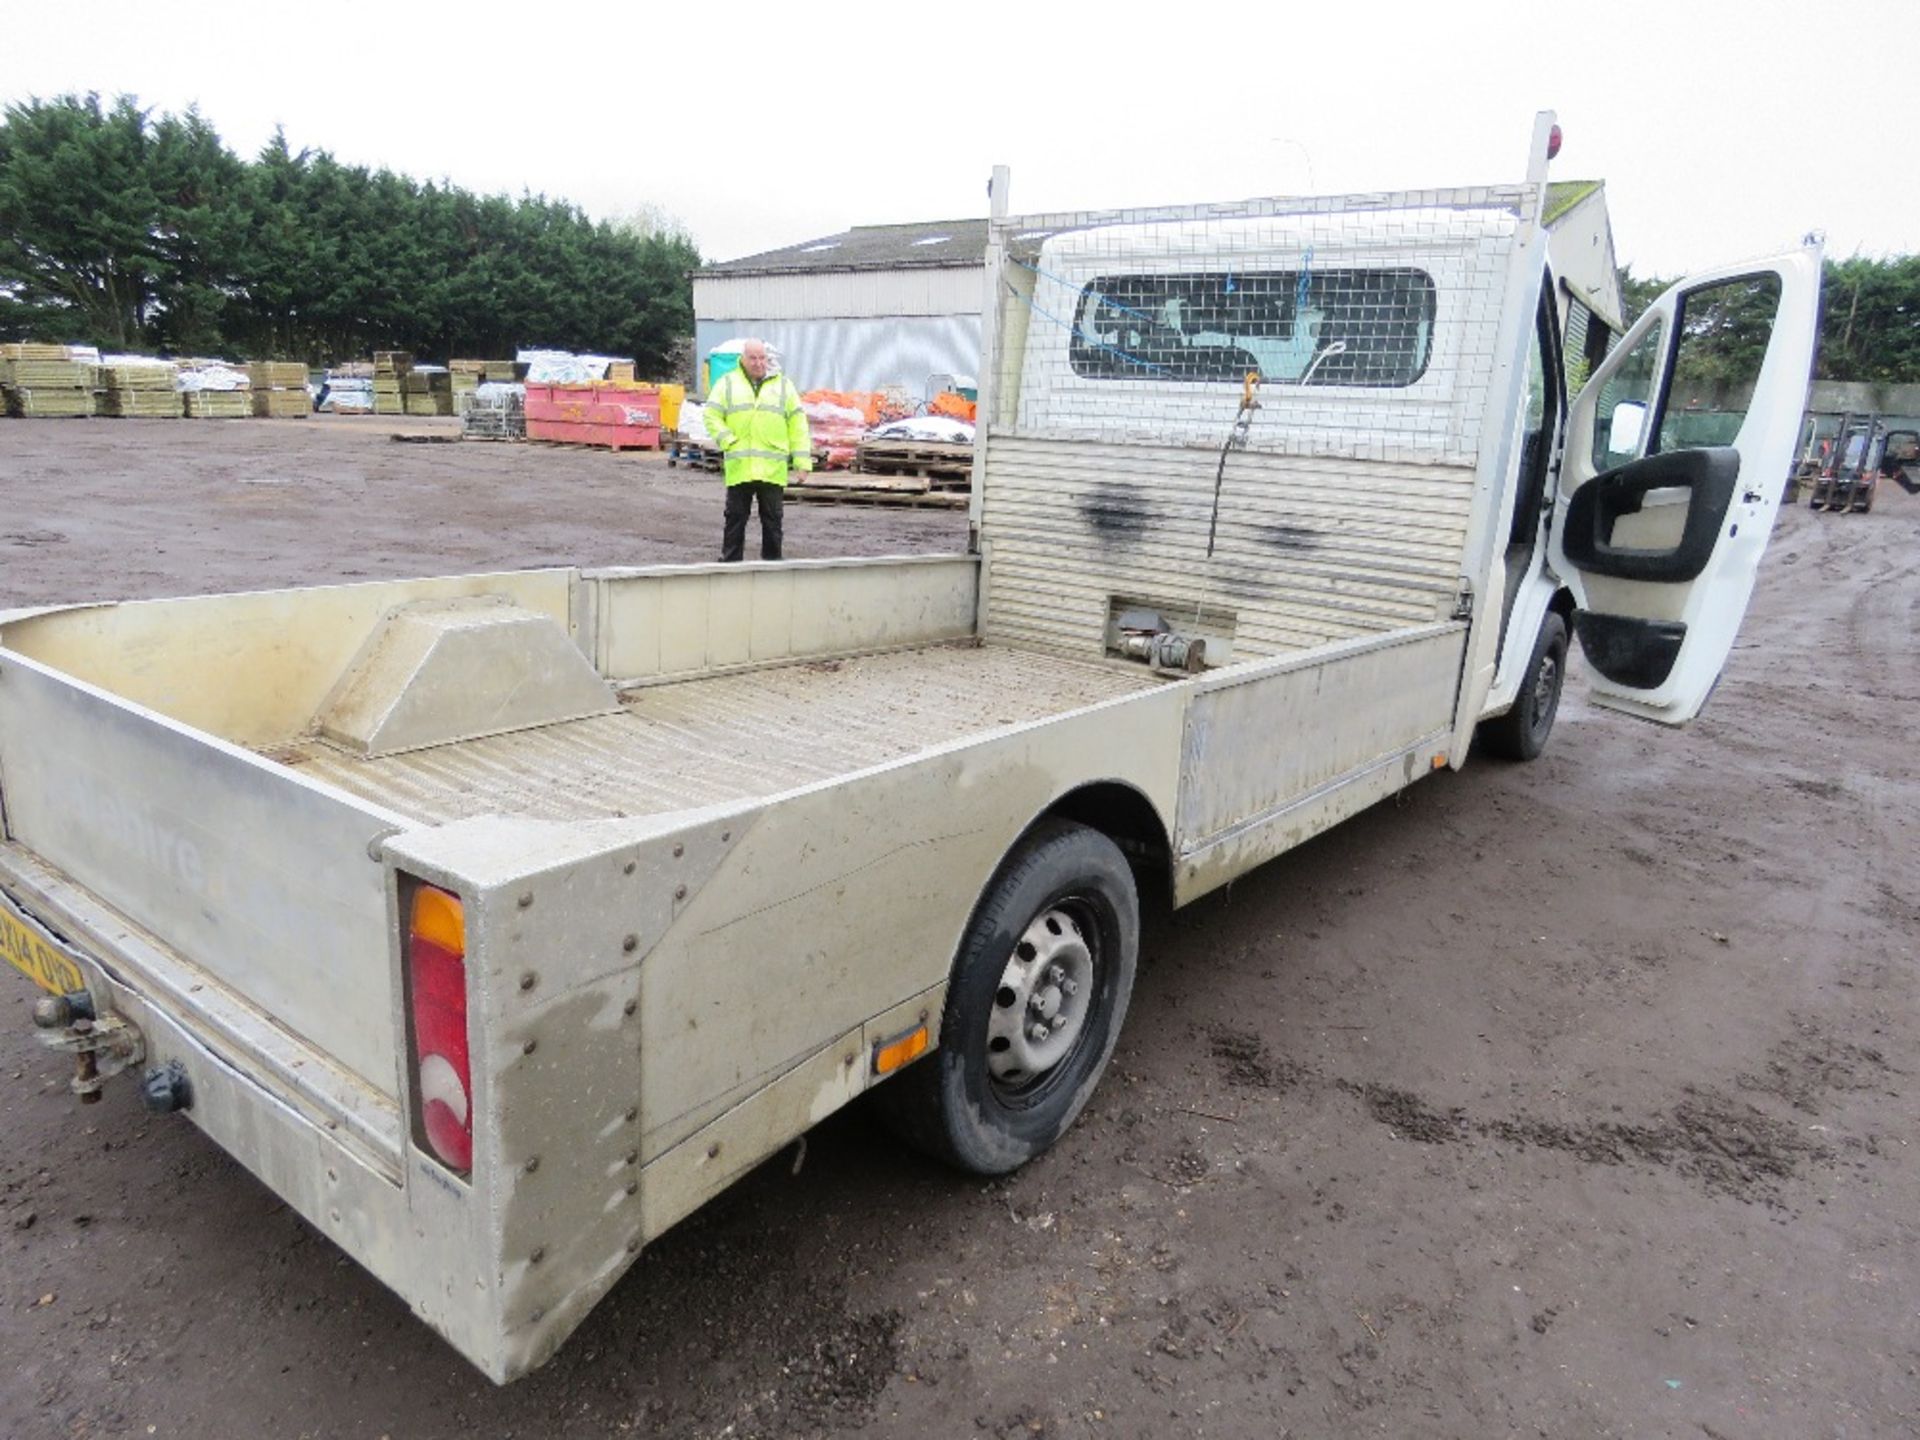 CITROEN LOW BED PLANT TRUCK, REG:BX14 OVP. 3500KG RATED WITH RAMPS. 125,870 REC MILES. WITH V5, MOT - Image 8 of 13